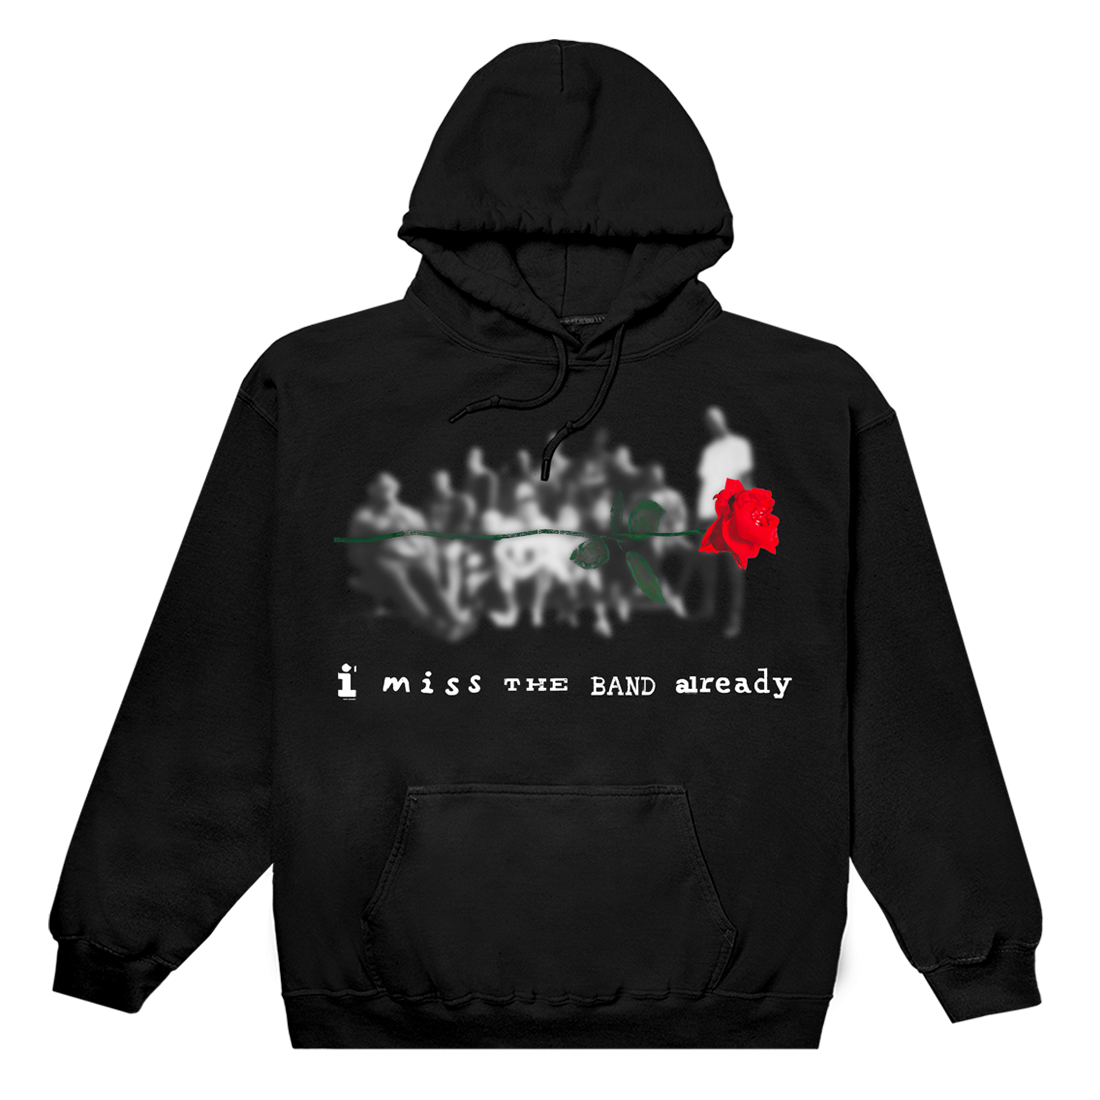 I MISS THE BAND ALREADY HOODIE